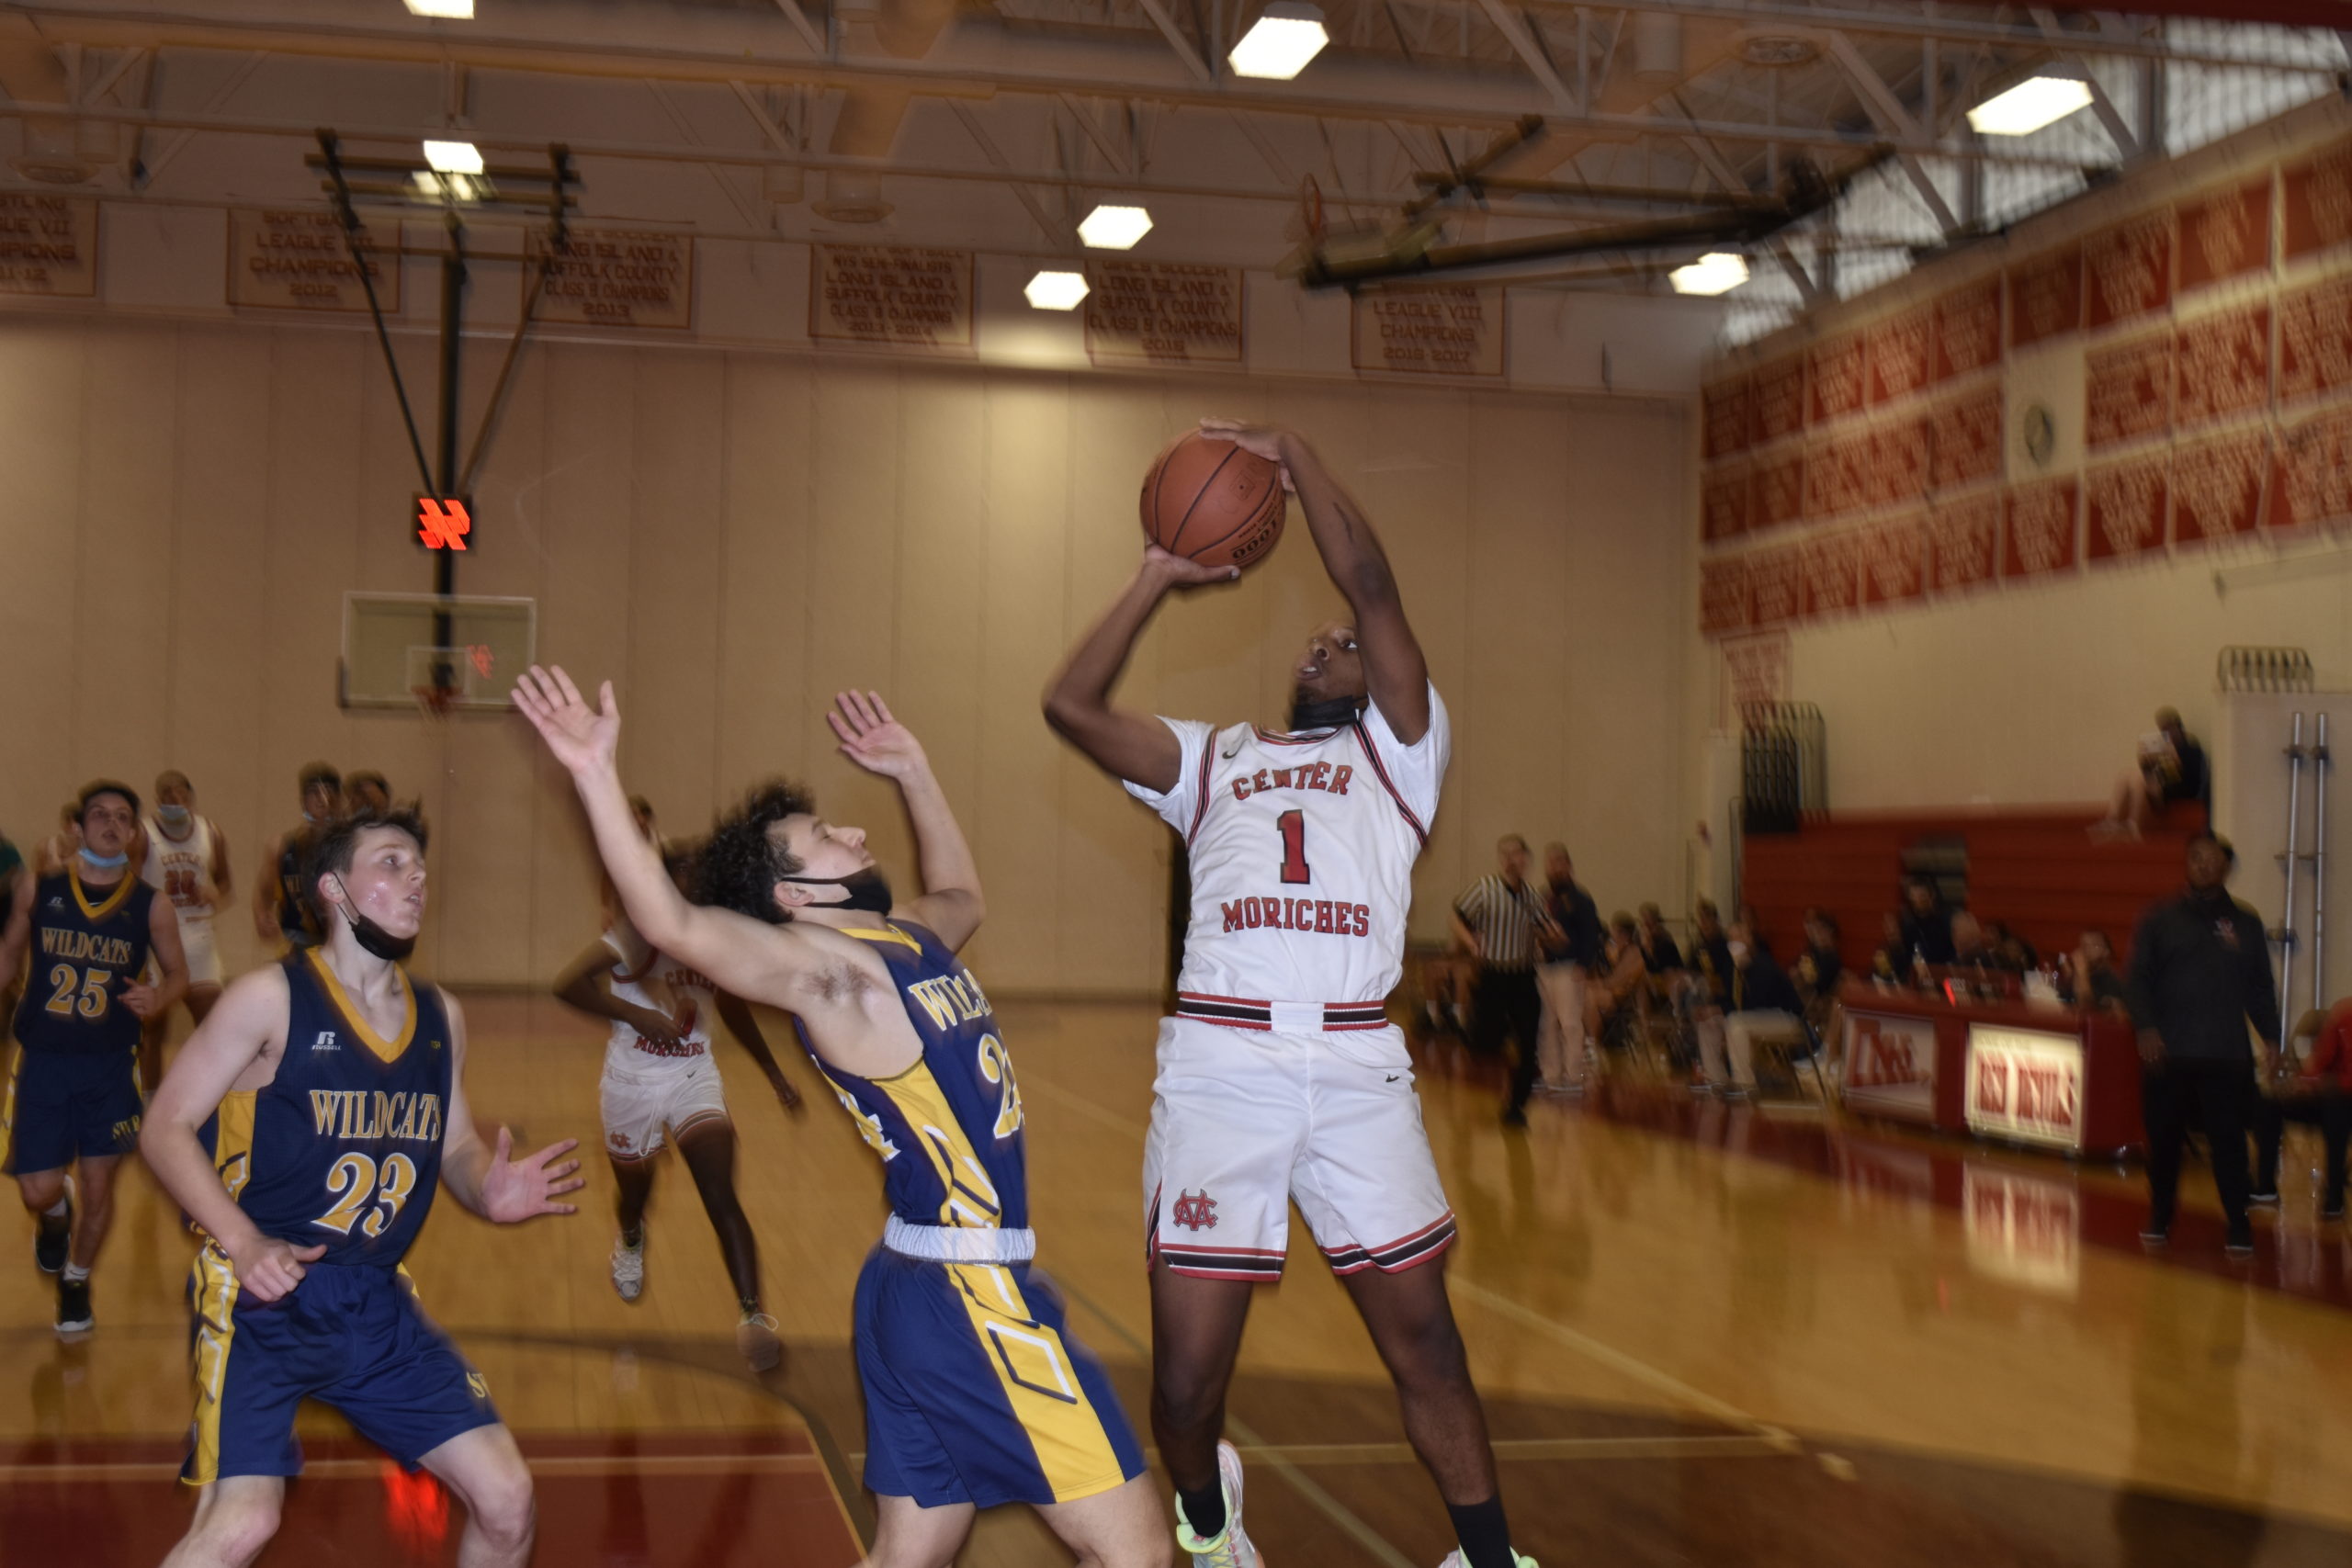 Junior C.J. Brackett scored 12 points off the bench in the Red Devils' 76-61 victory over Shoreham/Wading River on Sunday.